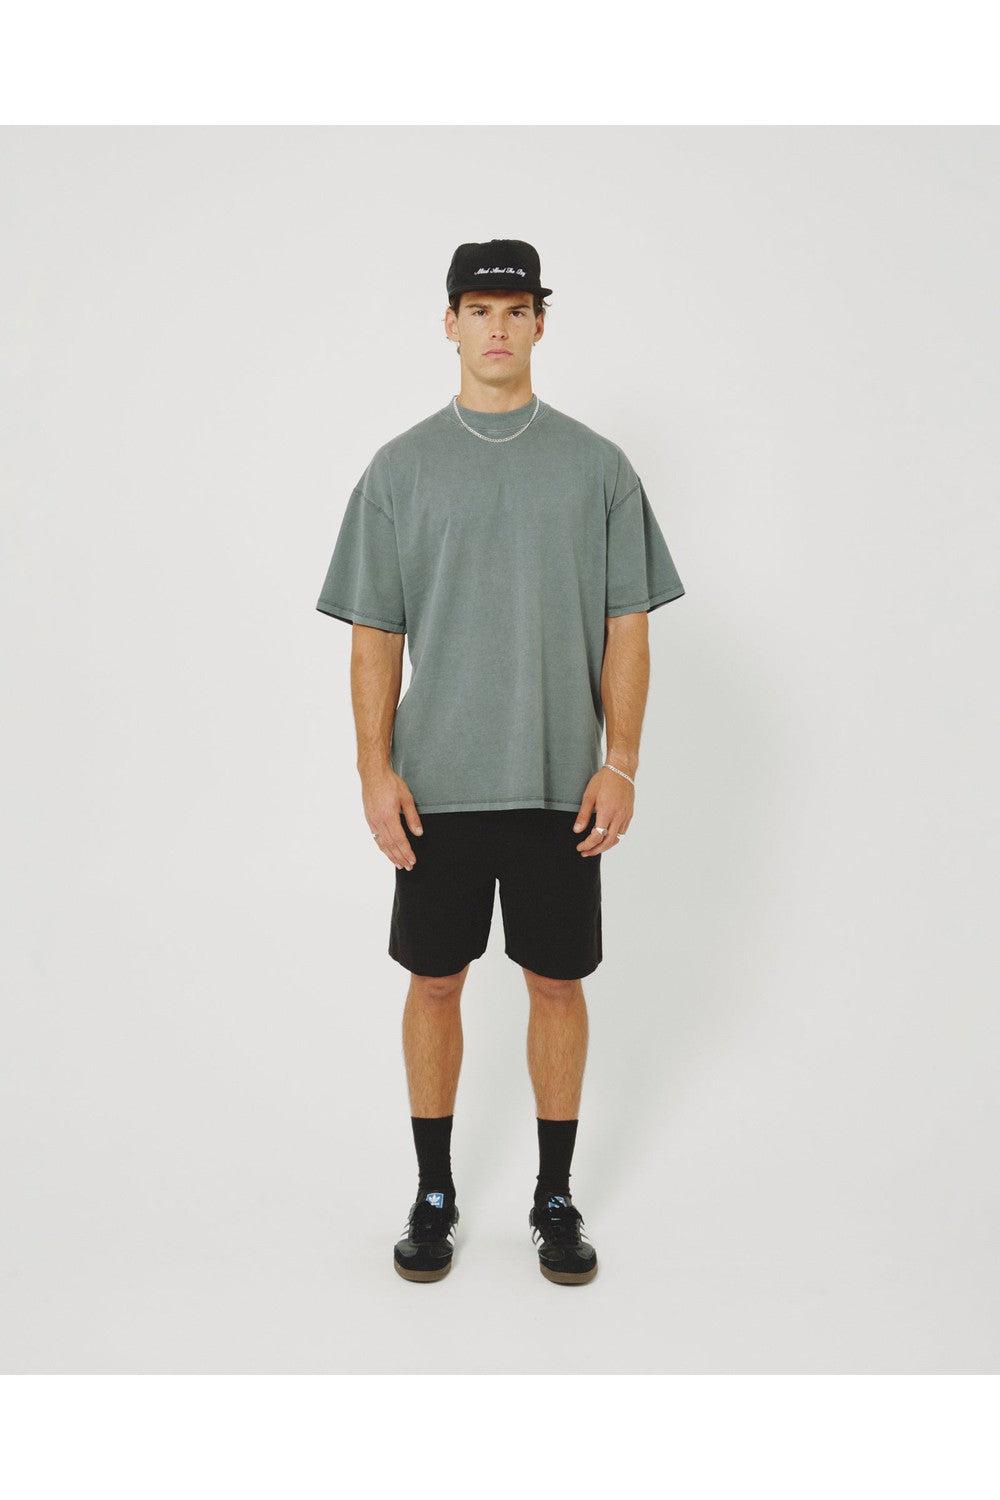 Commoners Mens Oversized Tee - Vintage Stormy | COMMONERS | Mad About The Boy